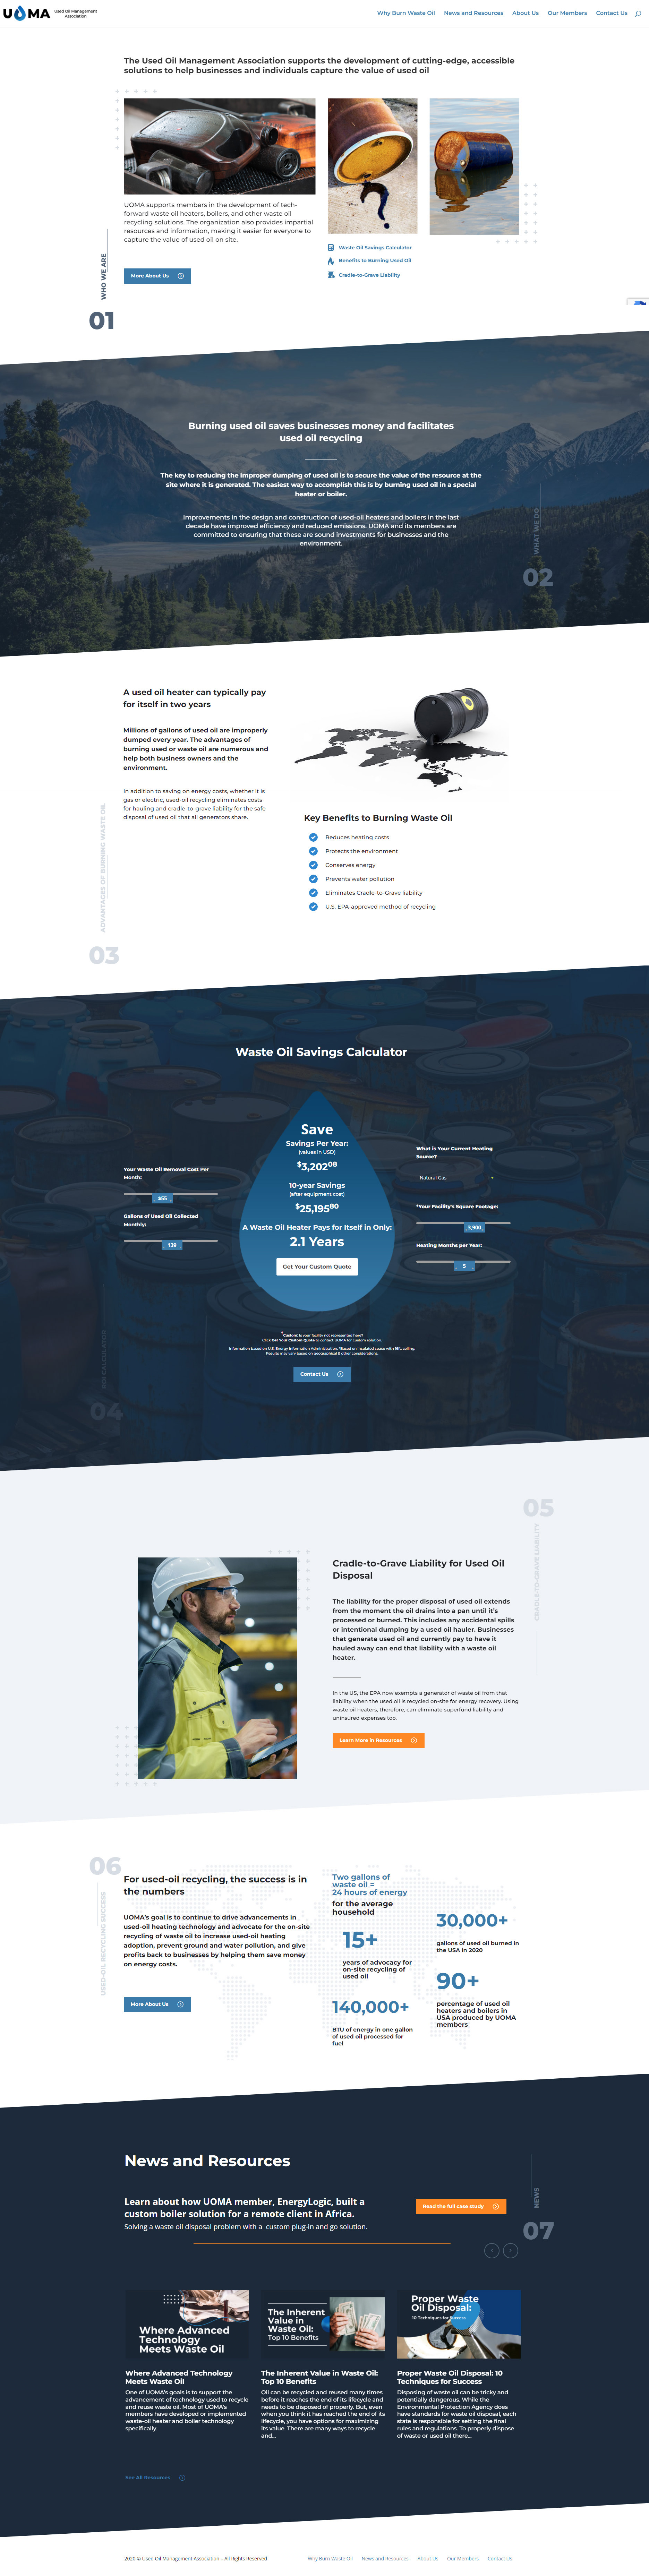 Example of the new and improved WordPress website designed by Foremost Media for Used Oil Management Association USA